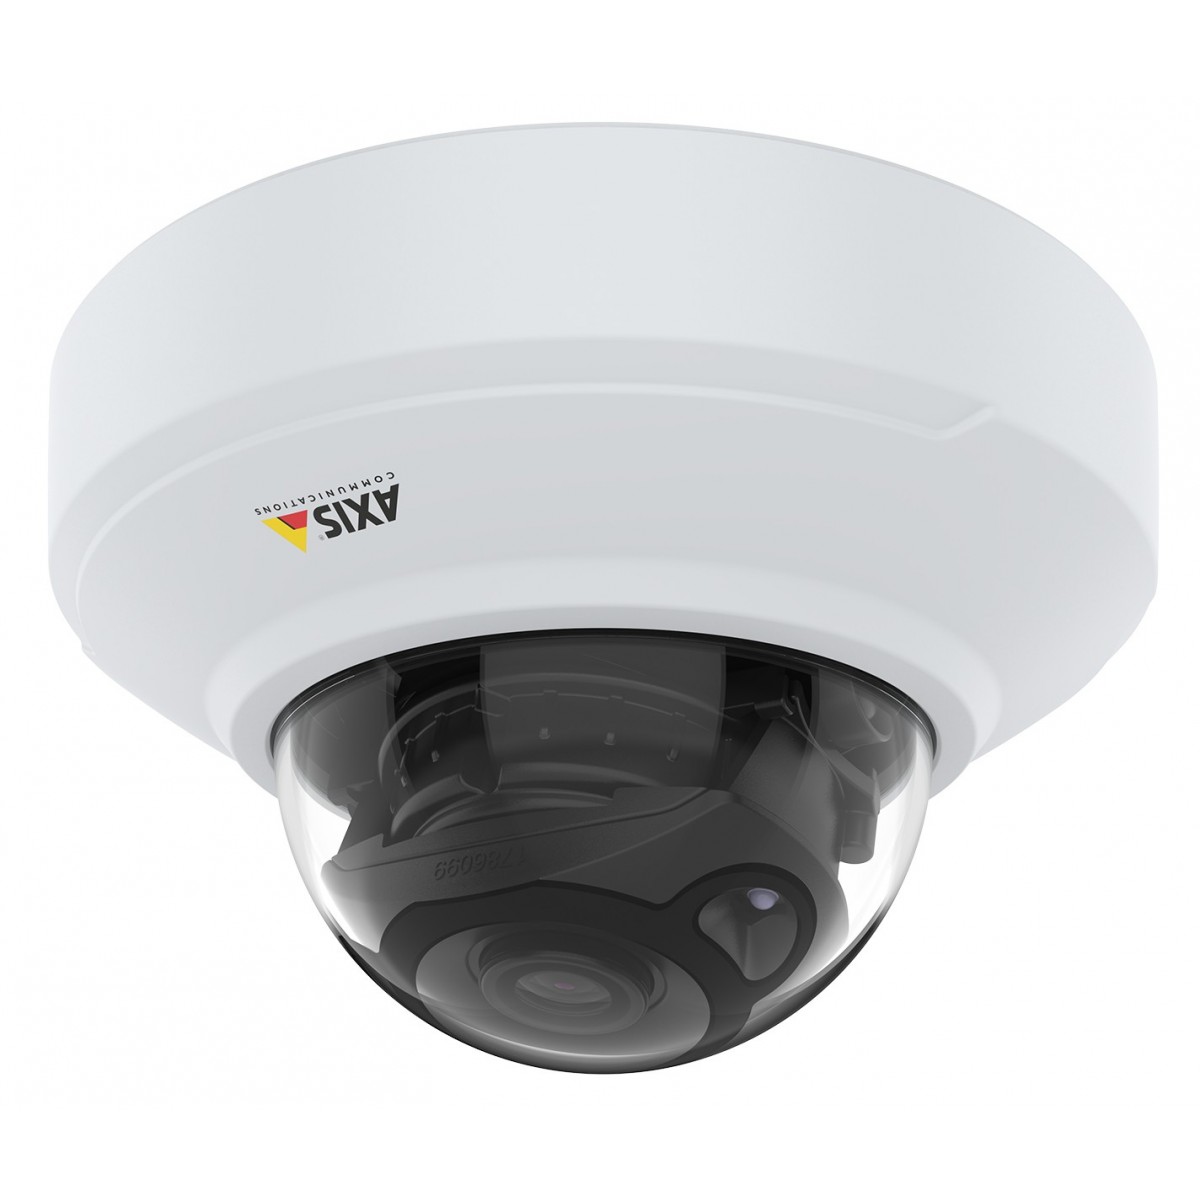 Axis M4206-LV - IP security camera - Indoor - Wired - Digital PTZ - Simplified Chinese - Traditional Chinese - German - English 